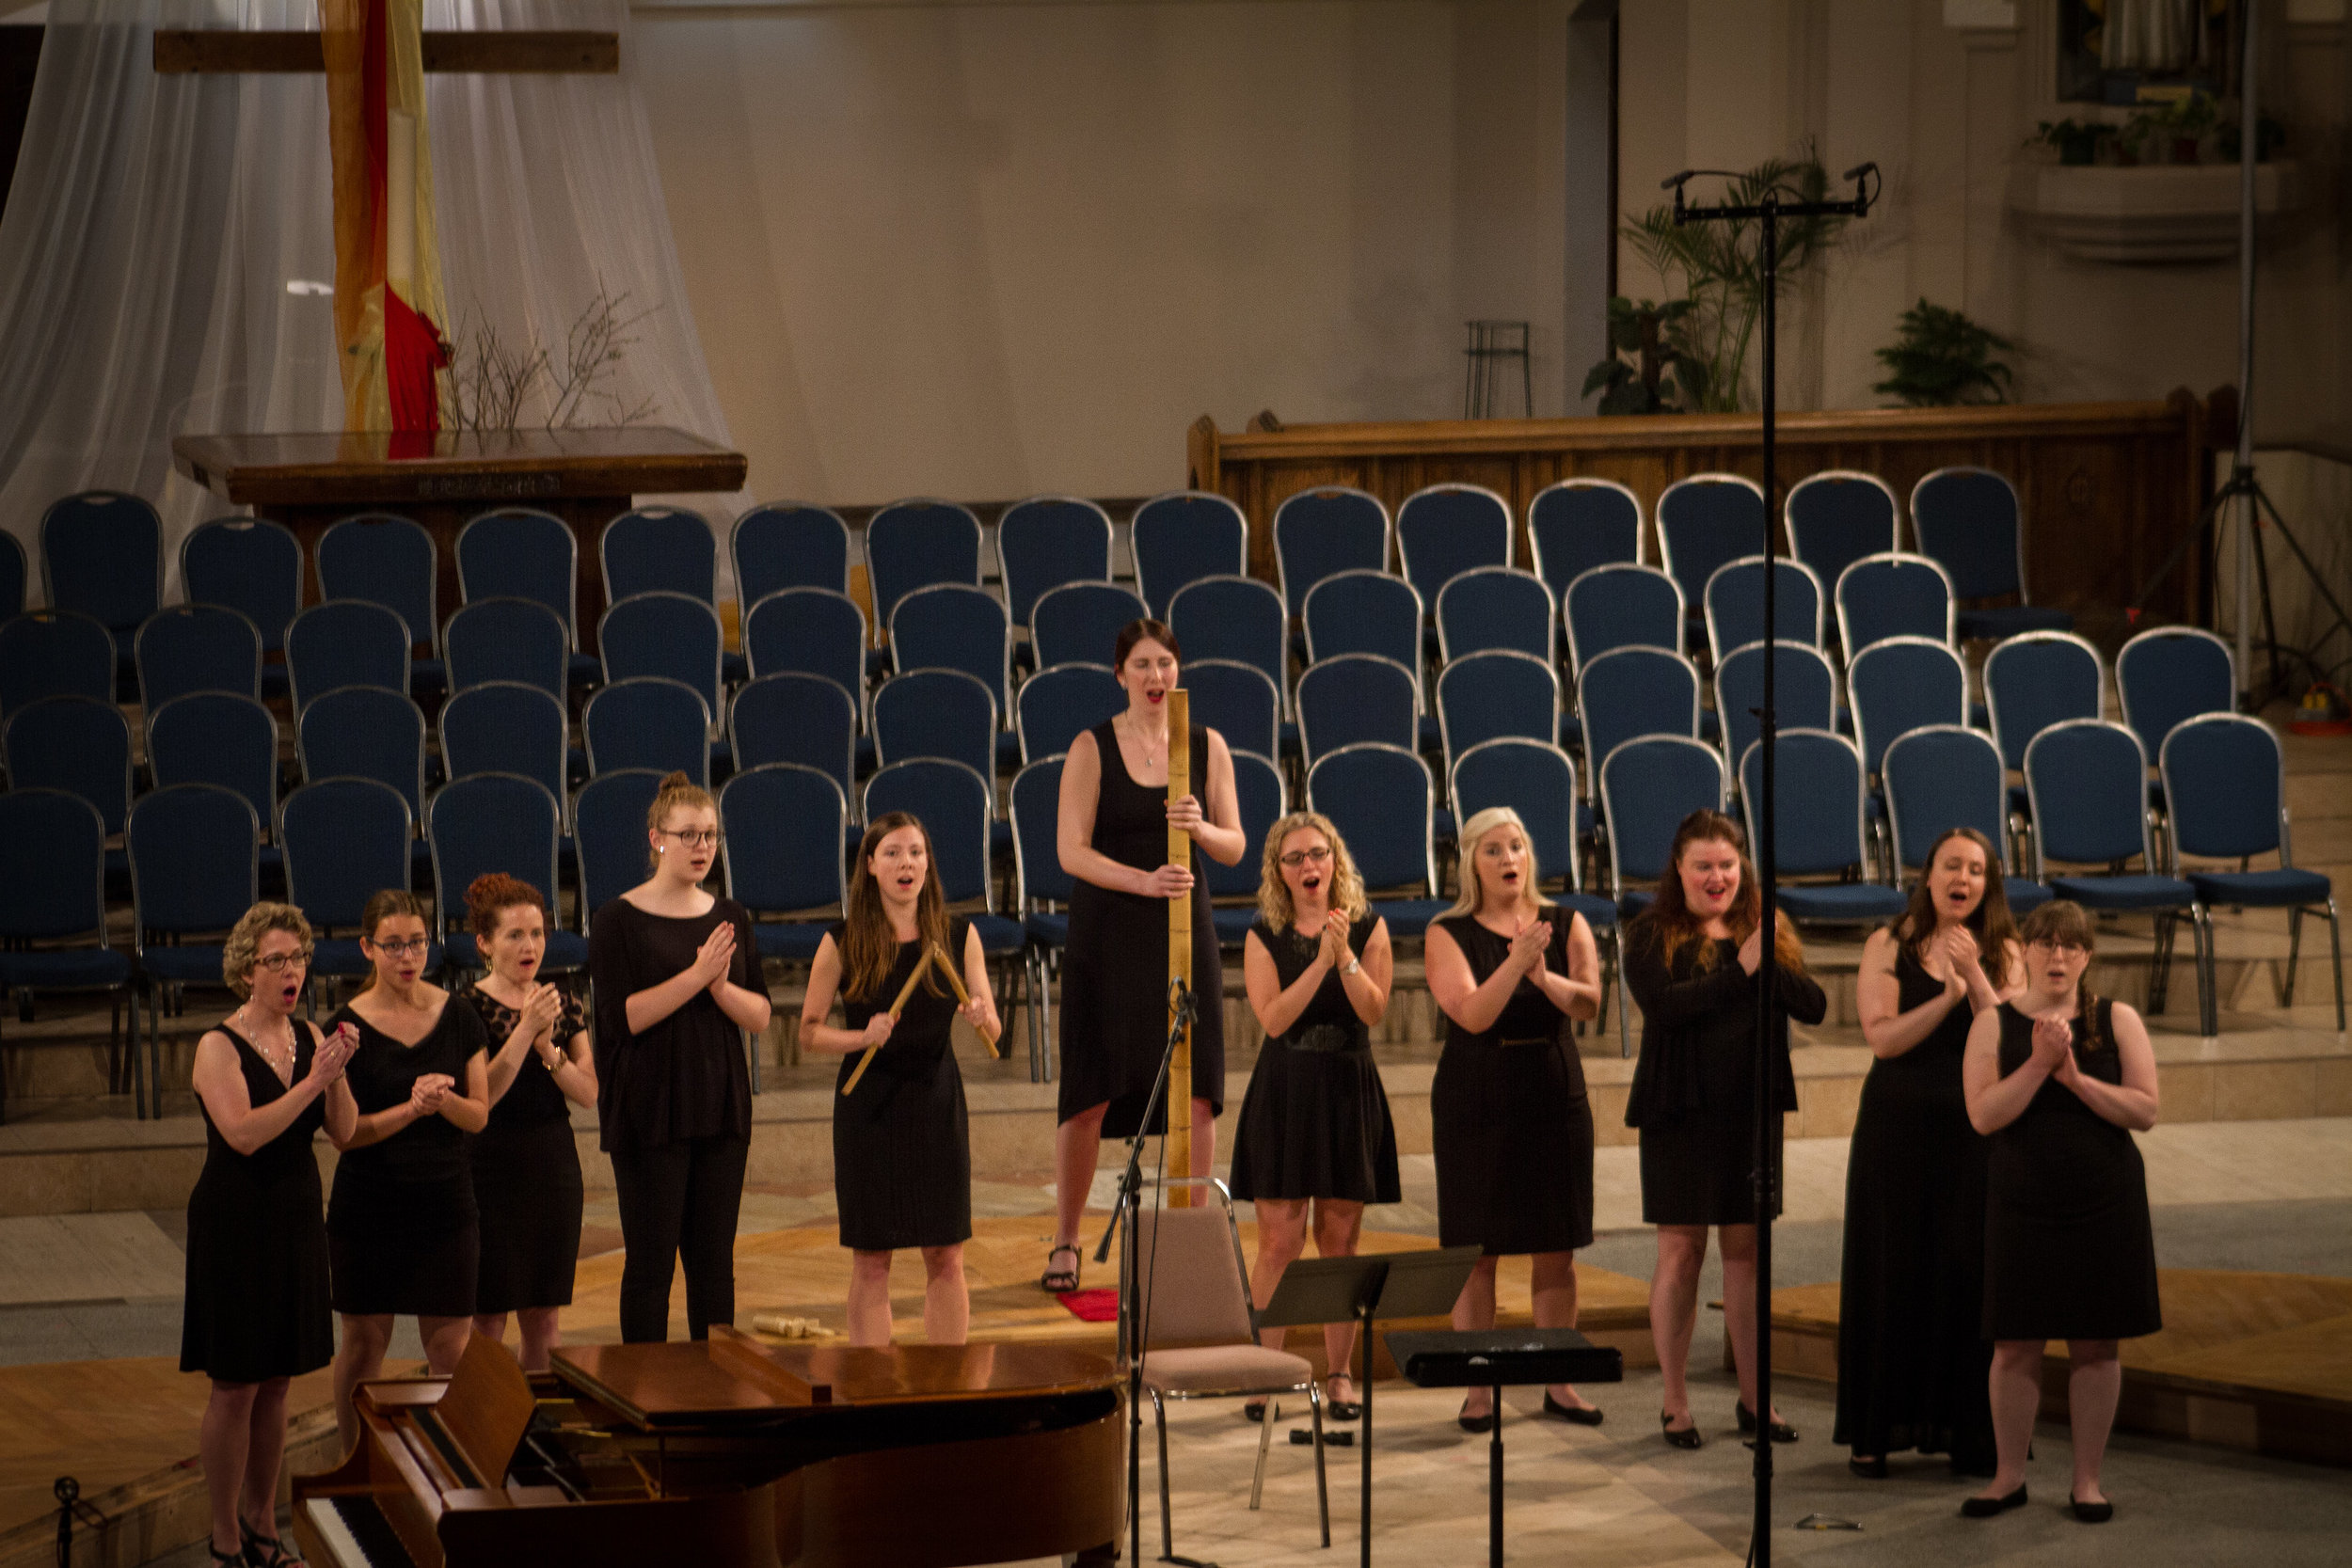  Performing Stephen Hatfield's "Überlebensgross" at the  Sing Ottawa en choeur &nbsp;festival on June 25, 2017.  Photo Credit:  Anthony Boxell Photography   